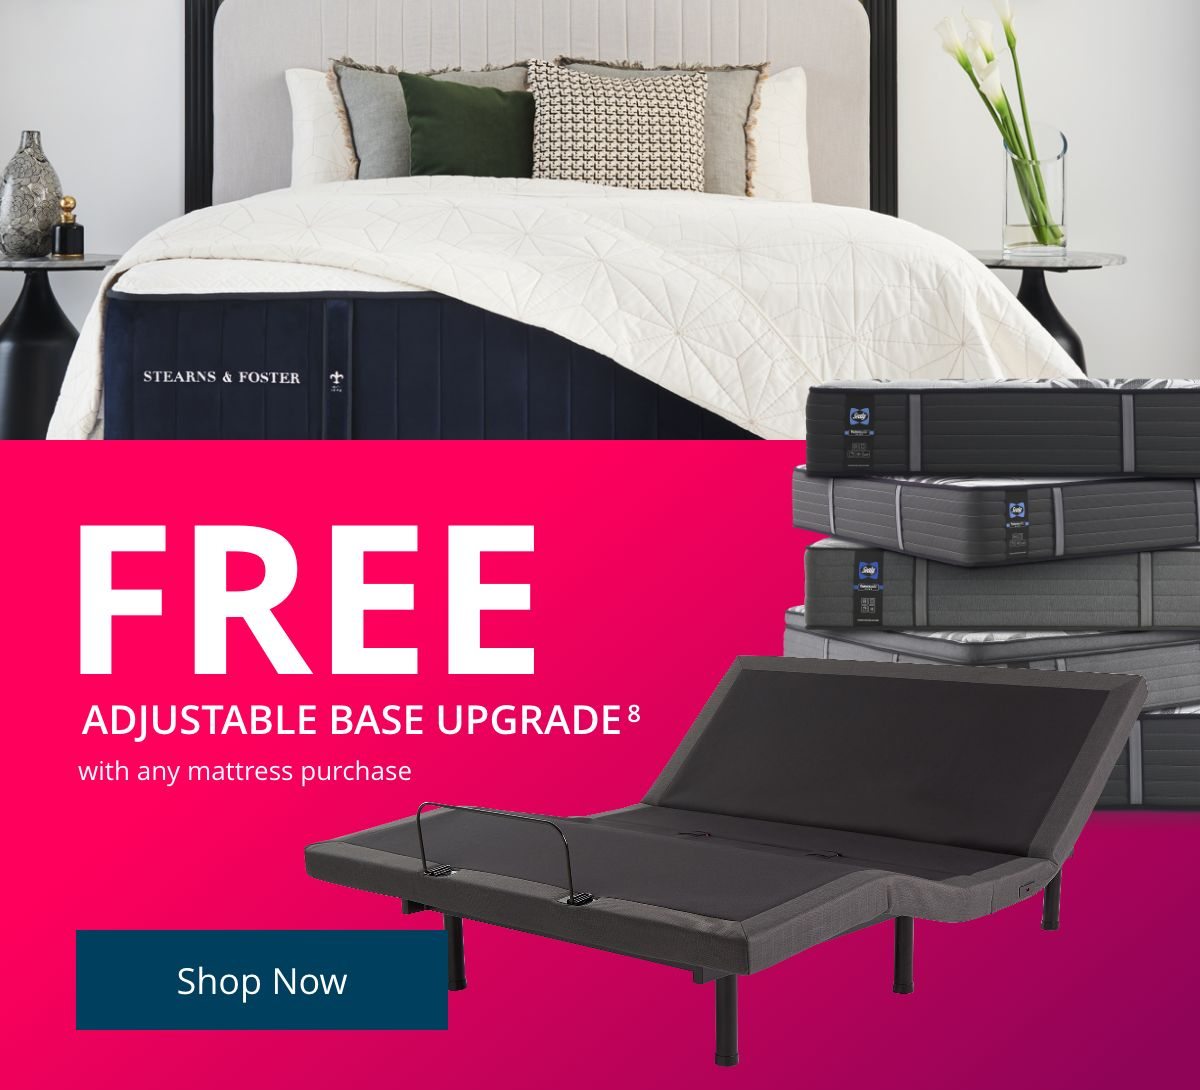 Free adjustable base upgrade with any mattress purchase